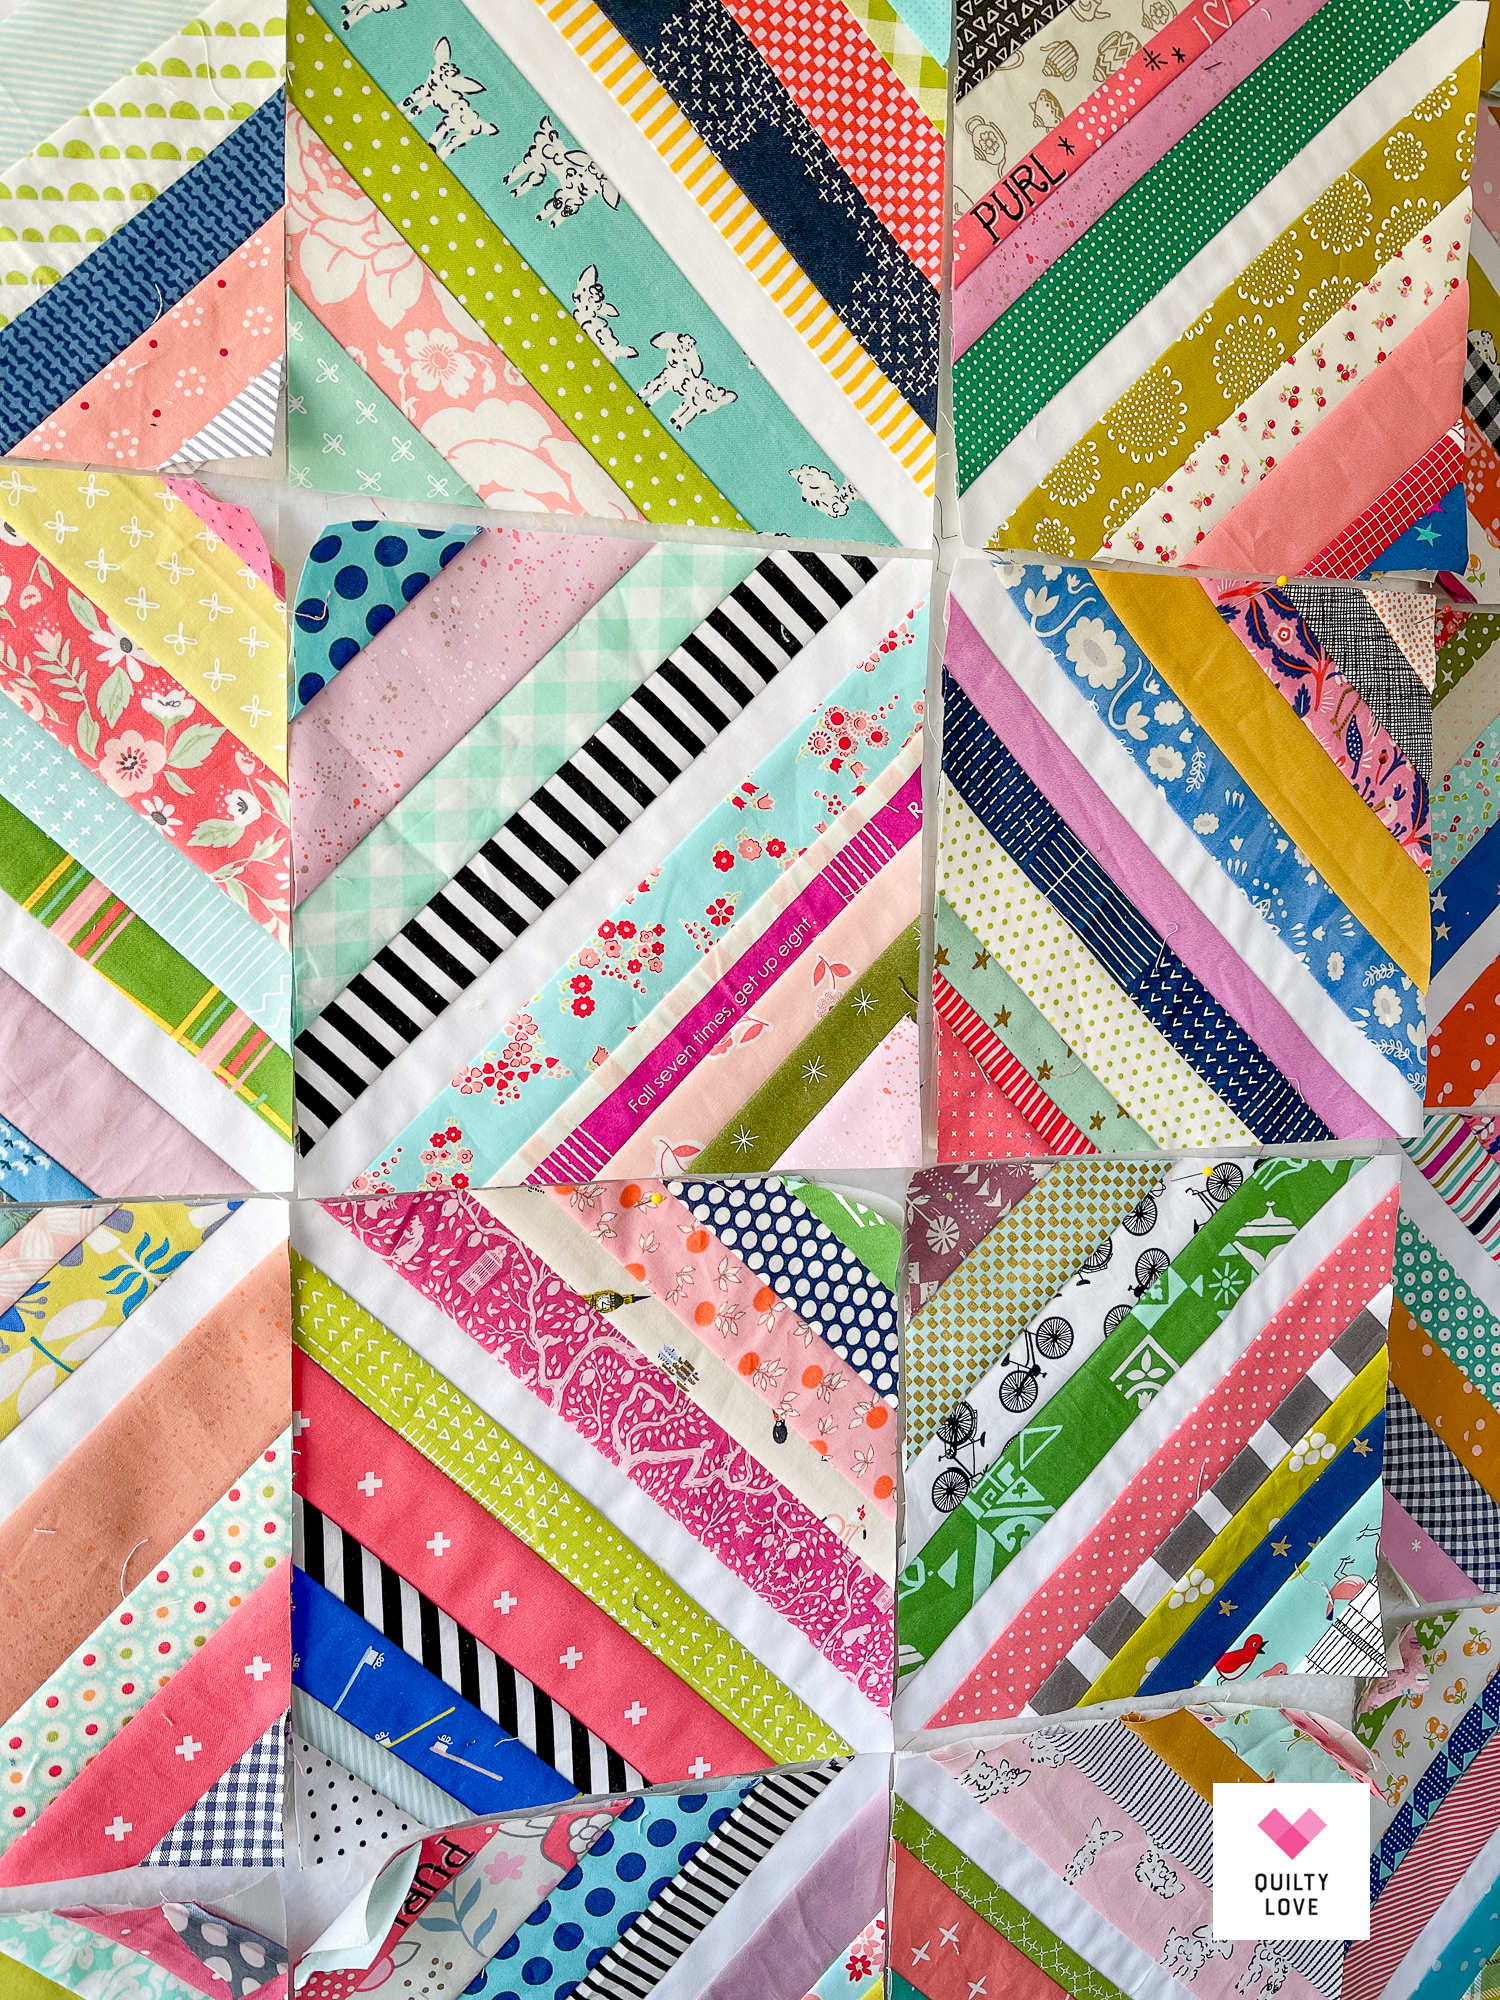 9 Ways to Buy Cheap Fabric for Quilting - Scrap Fabric Love